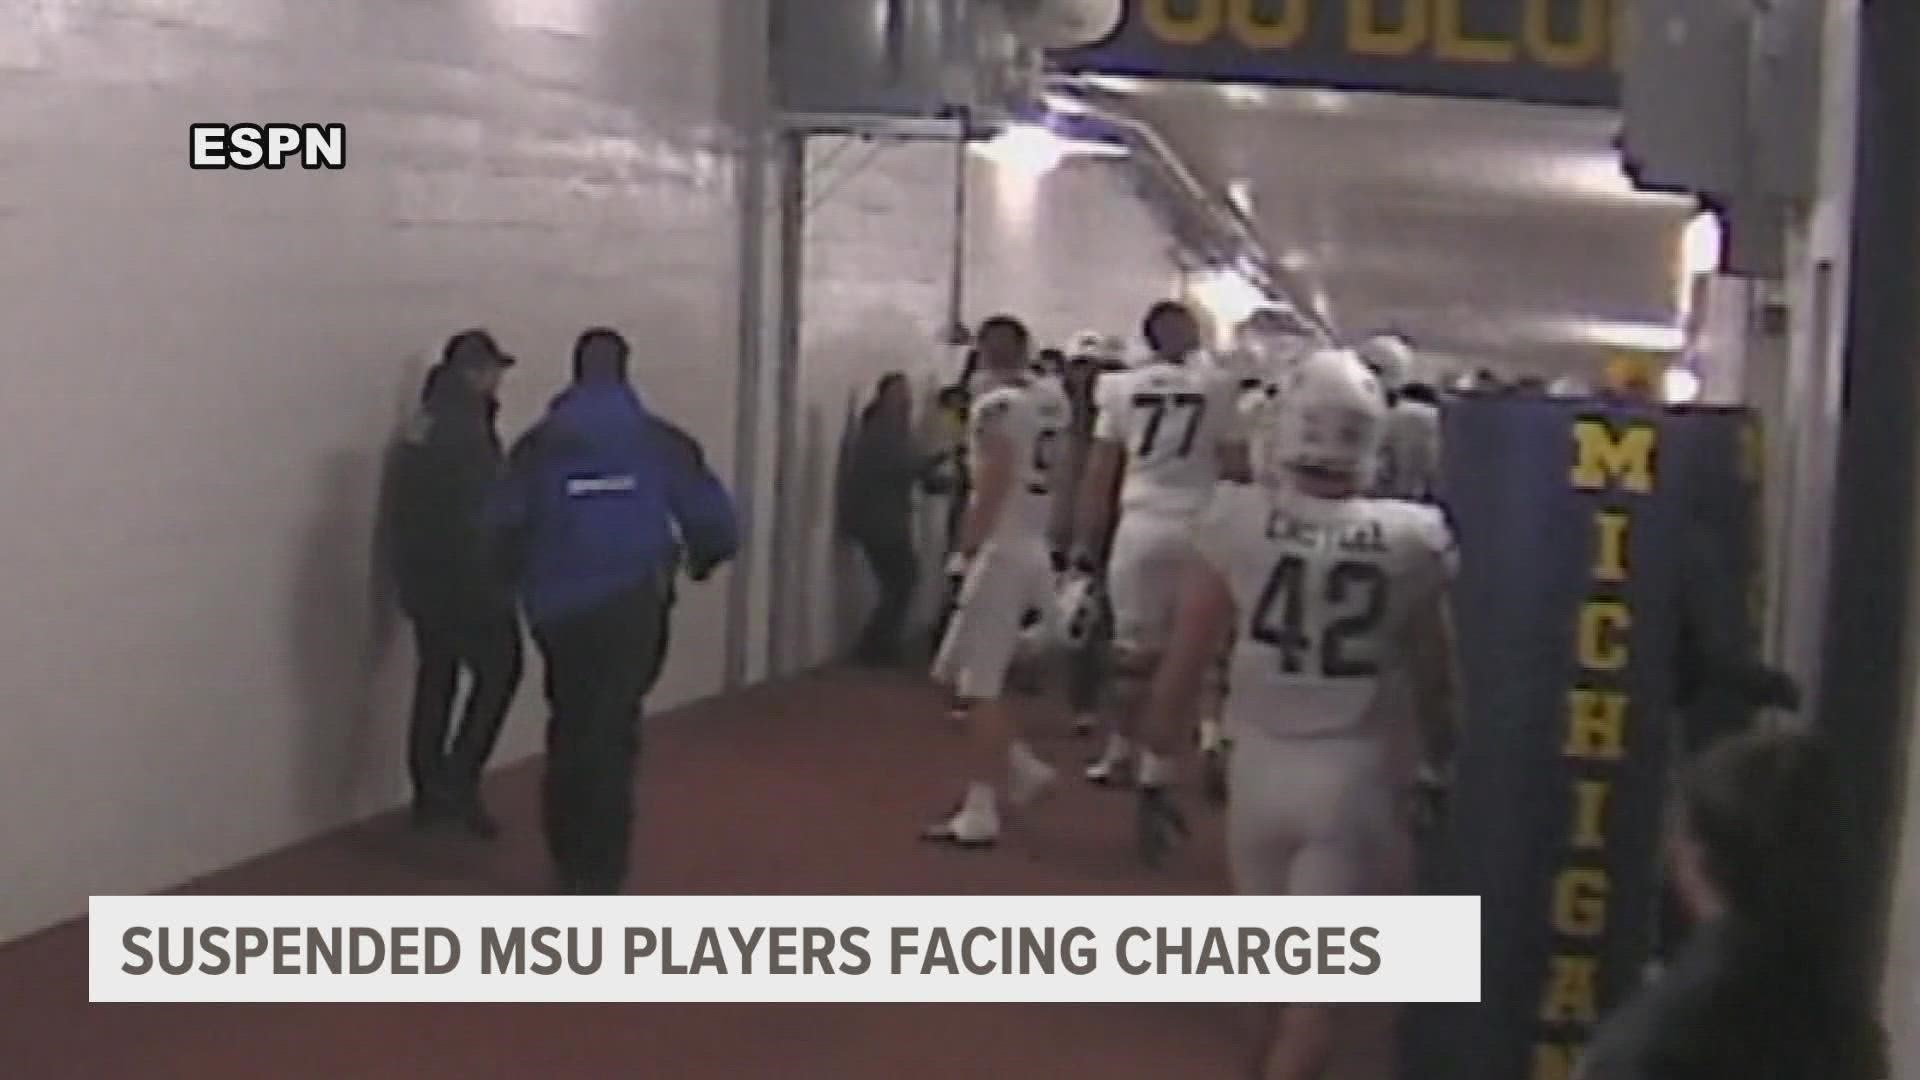 Nearly a month after a tunnel brawl following the Michigan State University and University of Michigan rivalry game, seven MSU players are facing charges.